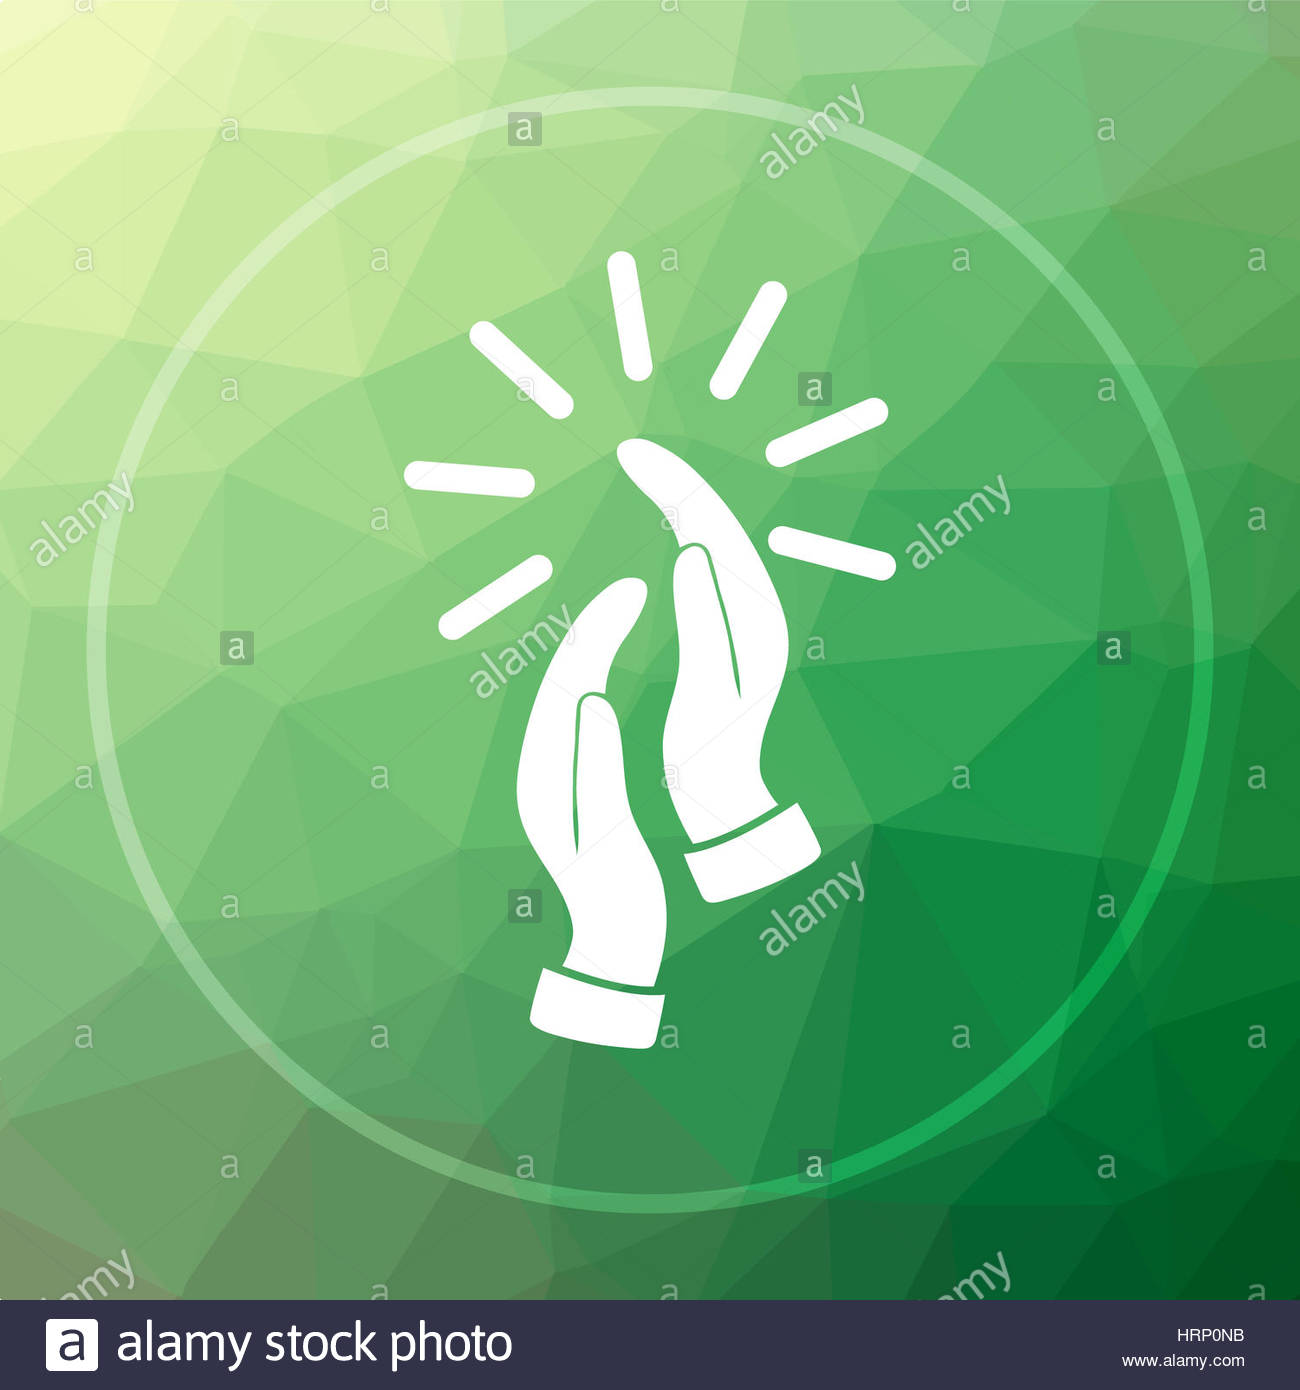 Applause Icon Website Button On Green Low Poly